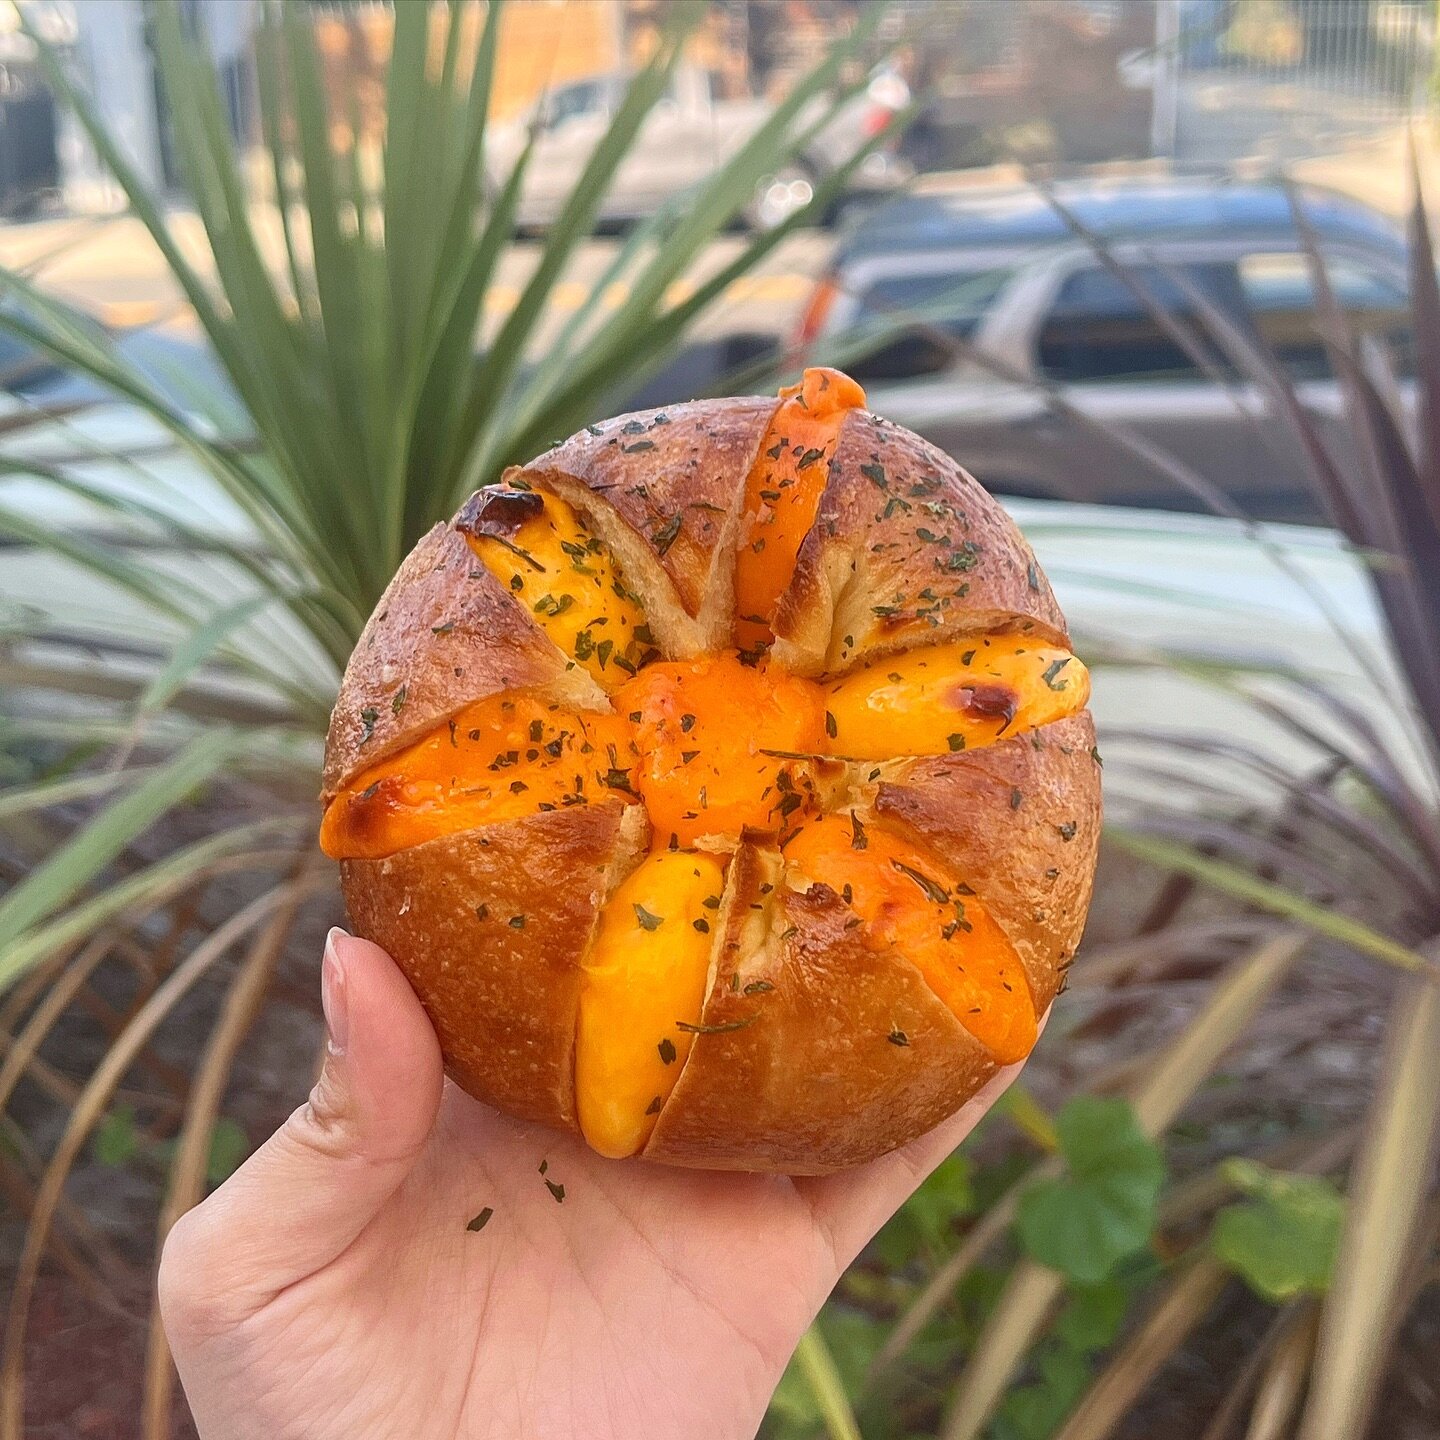 No it&rsquo;s not a #pumpkin - it&rsquo;s our new Cheddar Cheese filled crunchy chewy hand-rolled bagels 🧀 preorder 6 pack box #yummy treats perfect for this #halloween week 🎃 - LINK in BIO 🎁 .
_____
#giveaway winners now announced on our story 🗞